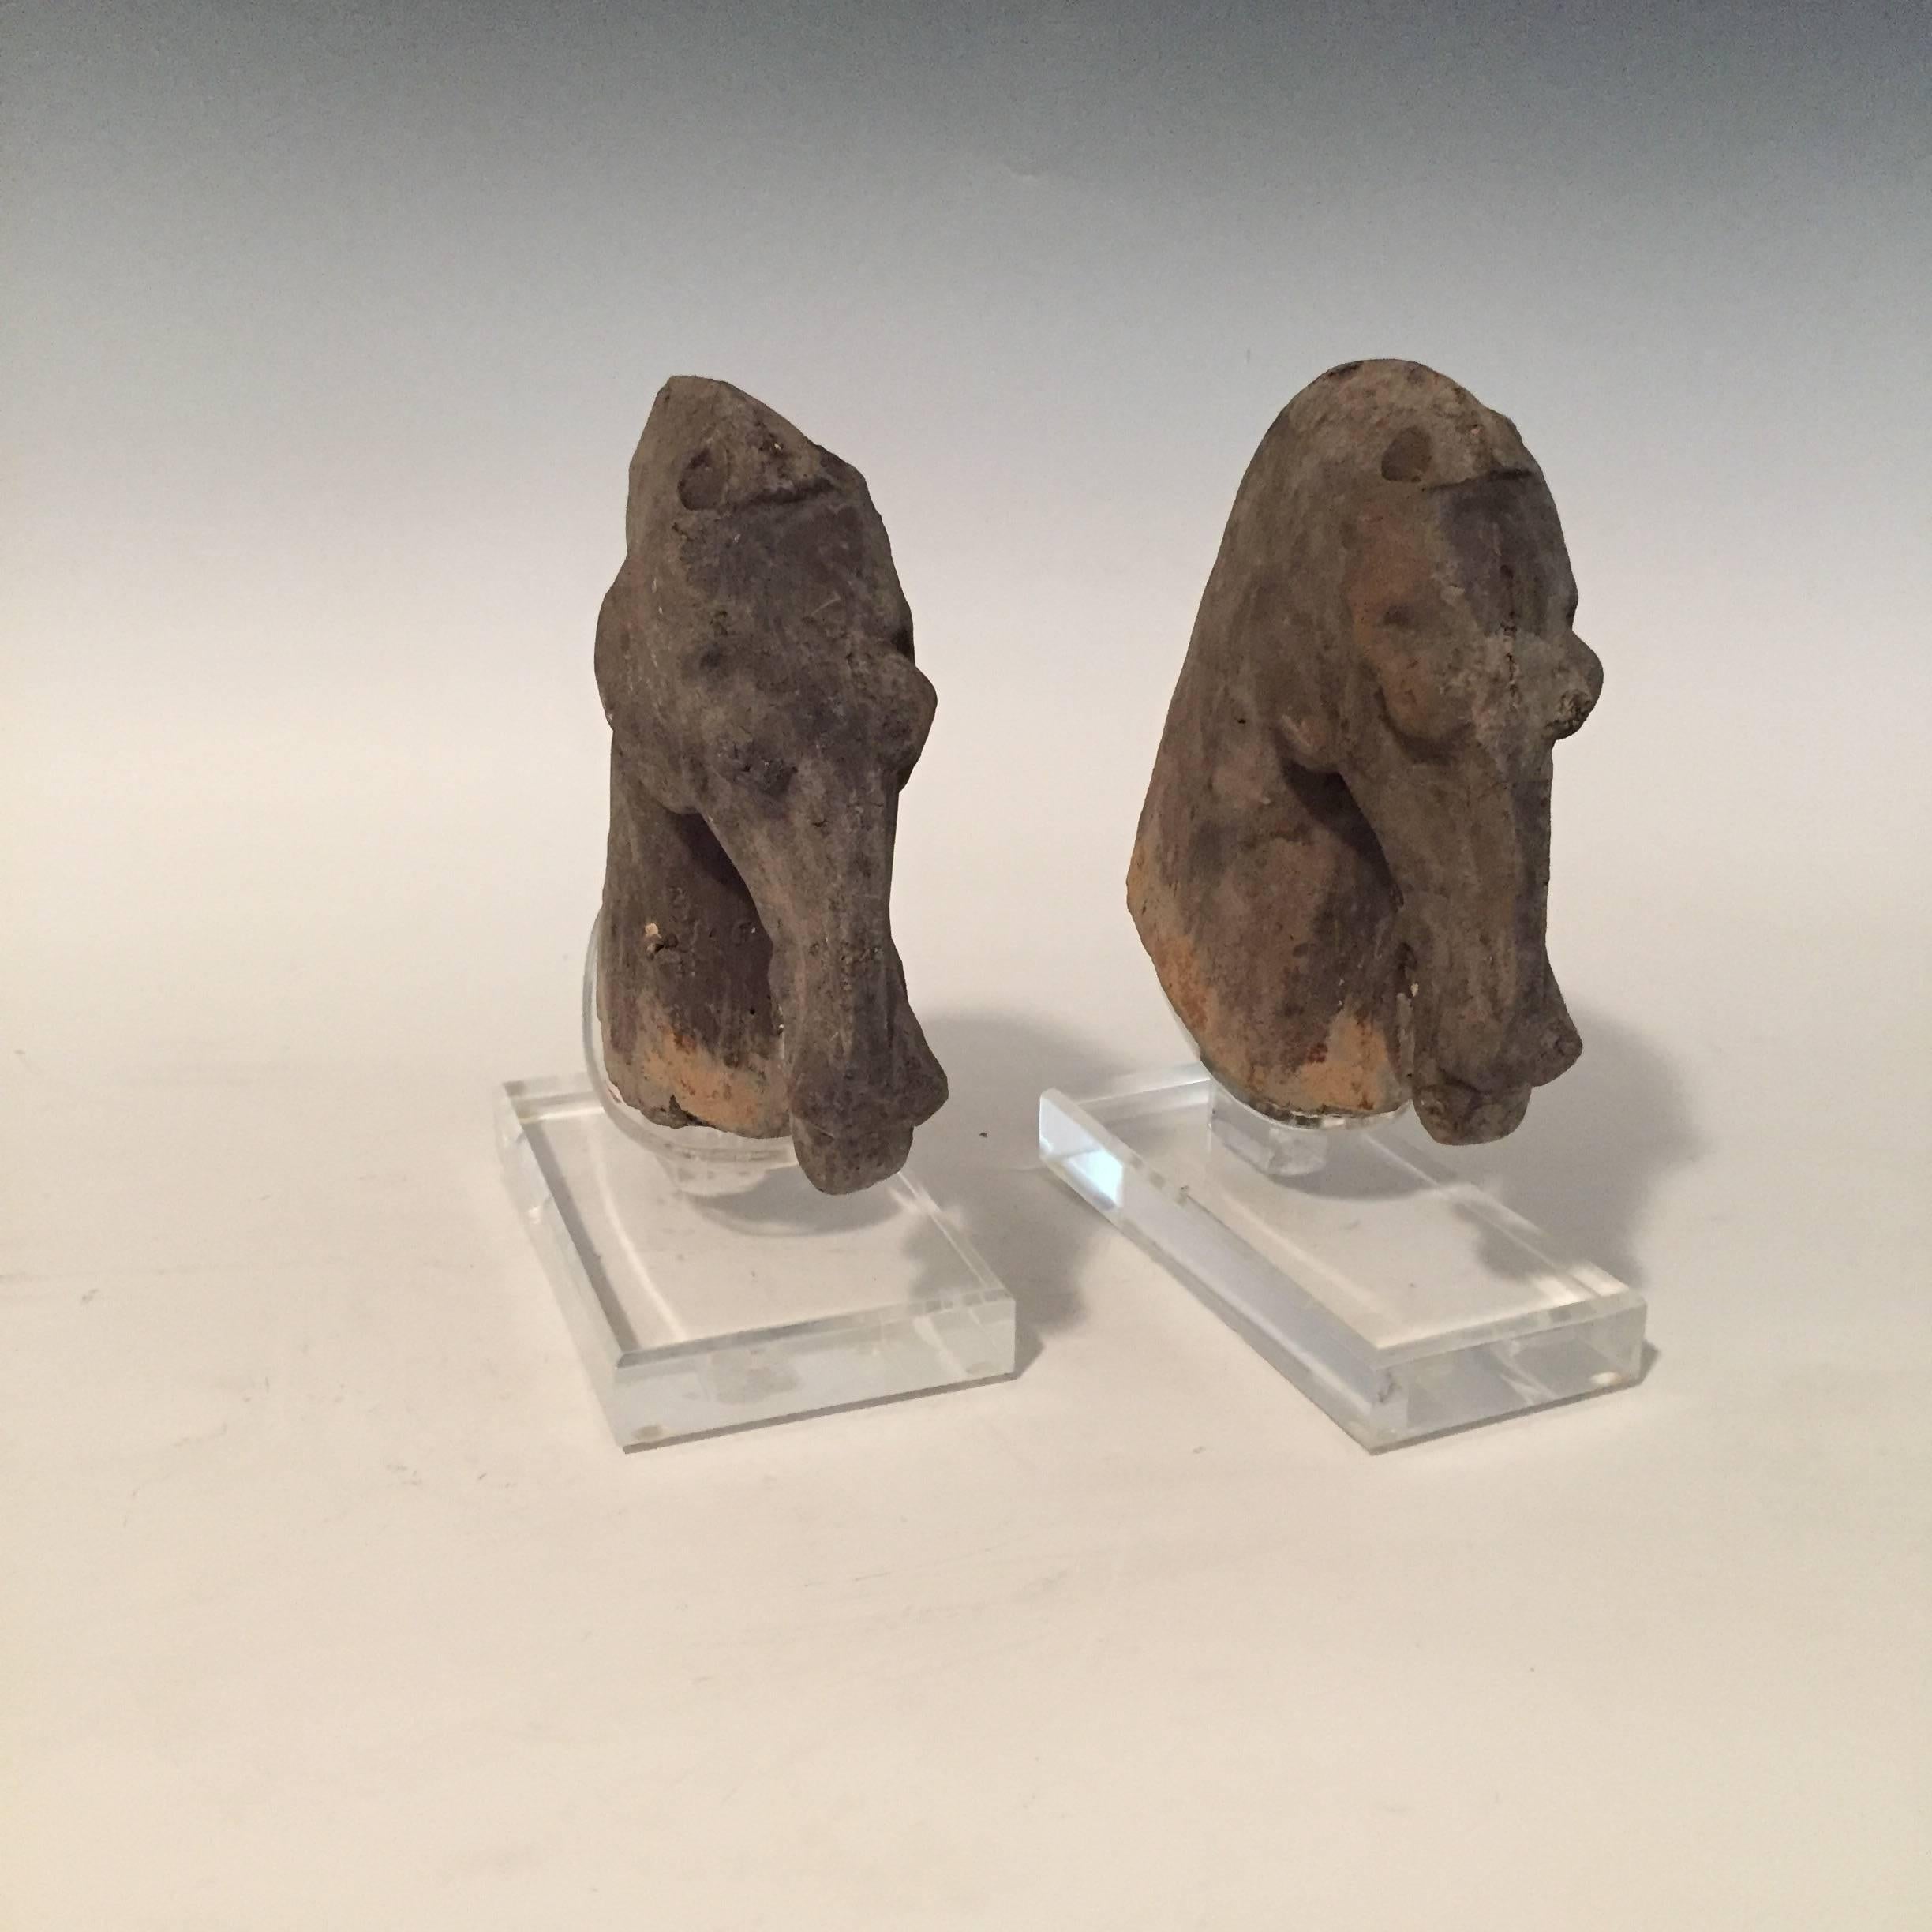 Pair of Han dynasty horse heads (206 BC-220 AD)
Grey pottery horse heads with patina. Each with strongly carved features, sitting upon clear plexiglass bases.
Measures: 8" tall x 8" length x 3.5" deep (horse head size).